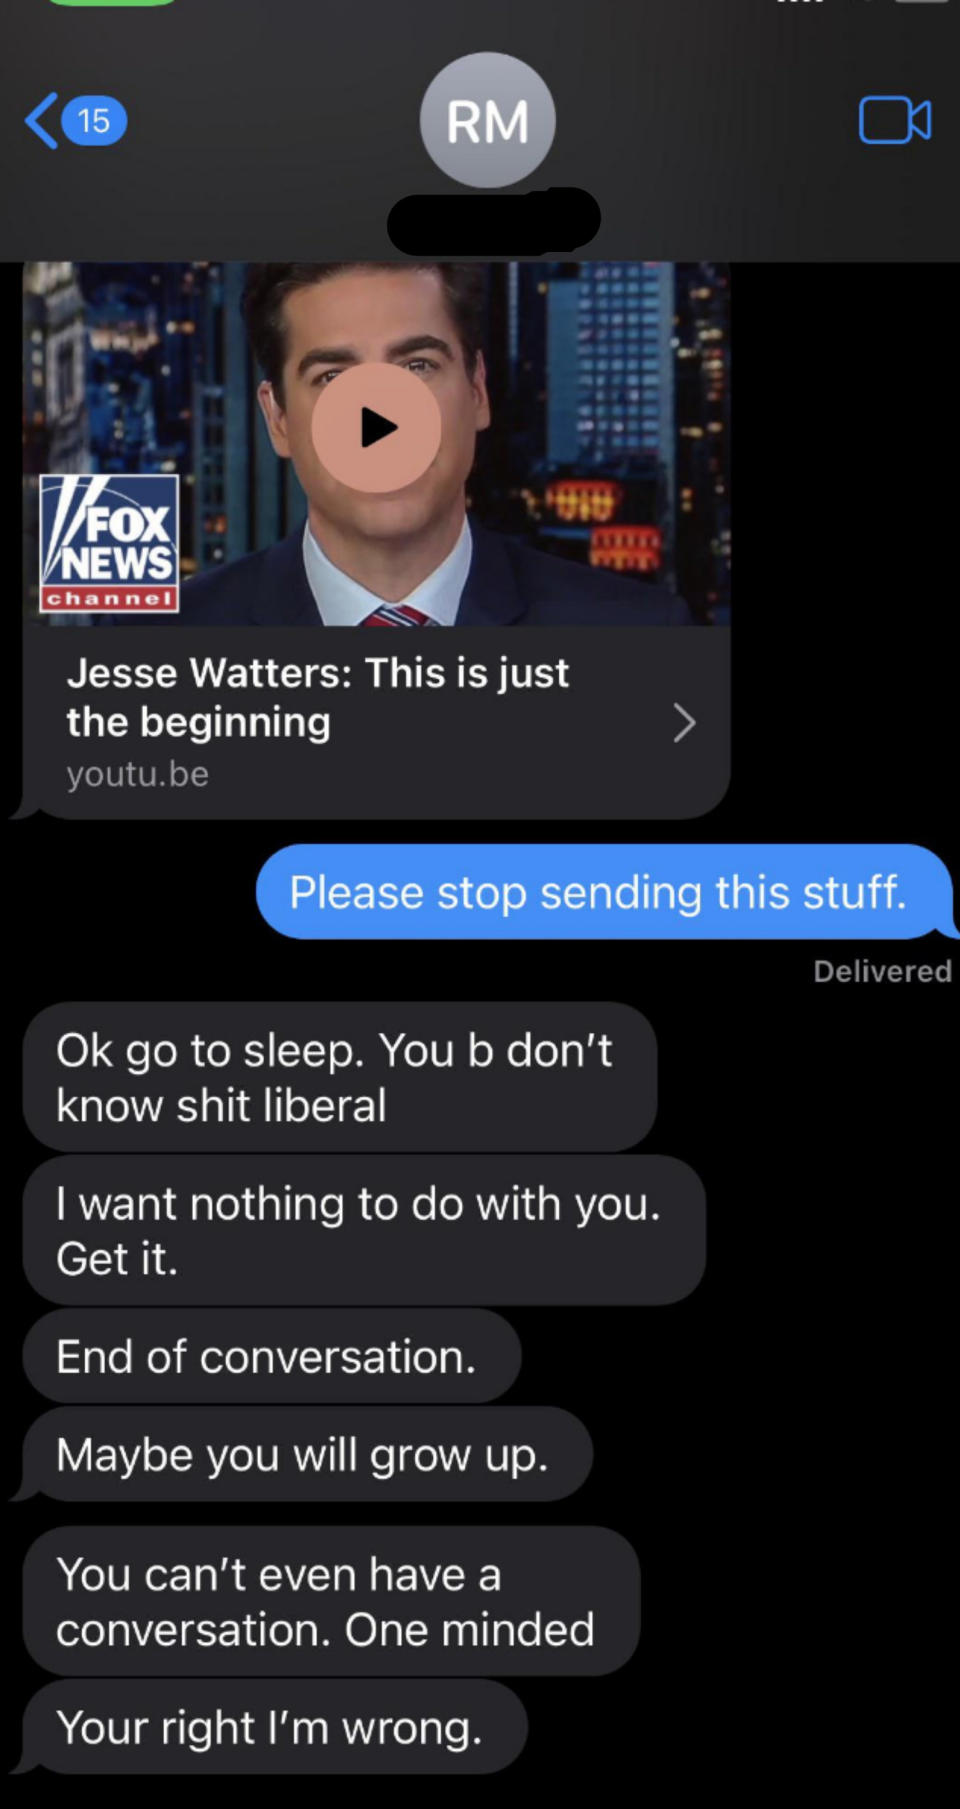 The parent sends a Fox News clip, the child asks them to stop, and the parent responds with a rant that says "you don't know shit liberal" and "I want nothing to do with you"